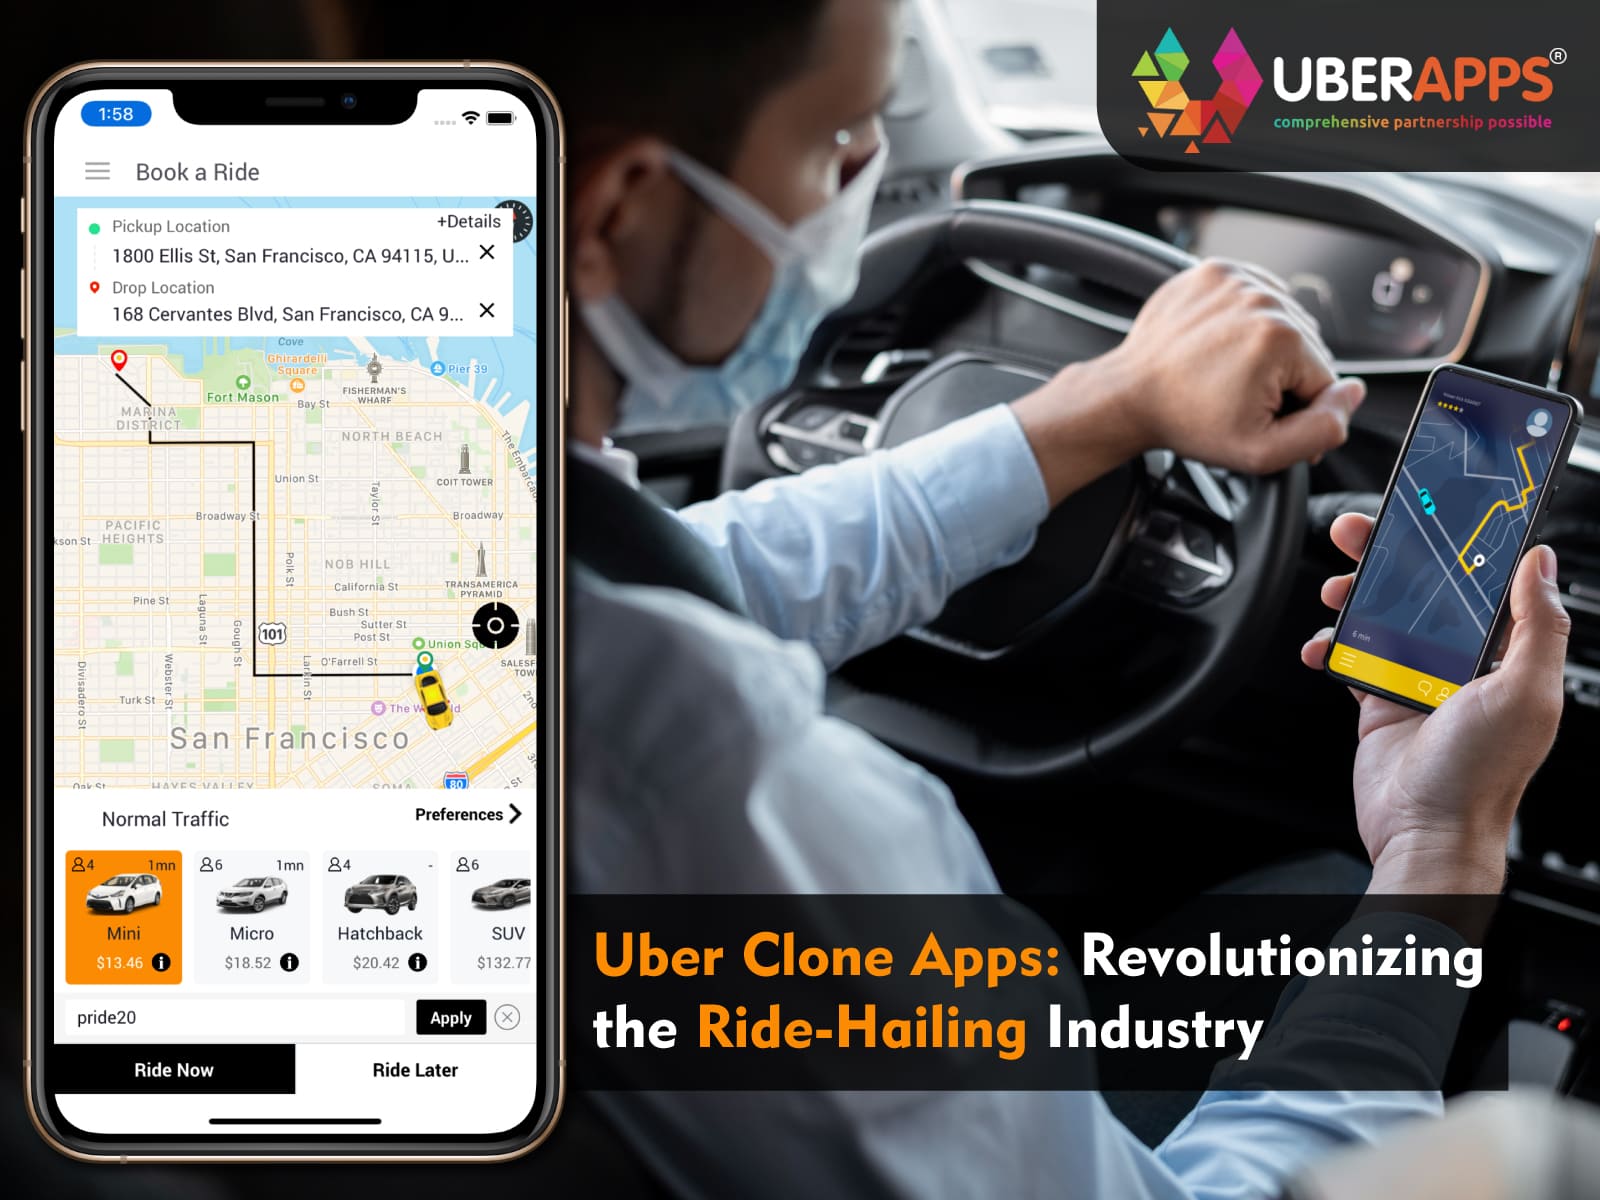 Uber Clone Apps: Revolutionizing the Ride-Hailing Industry